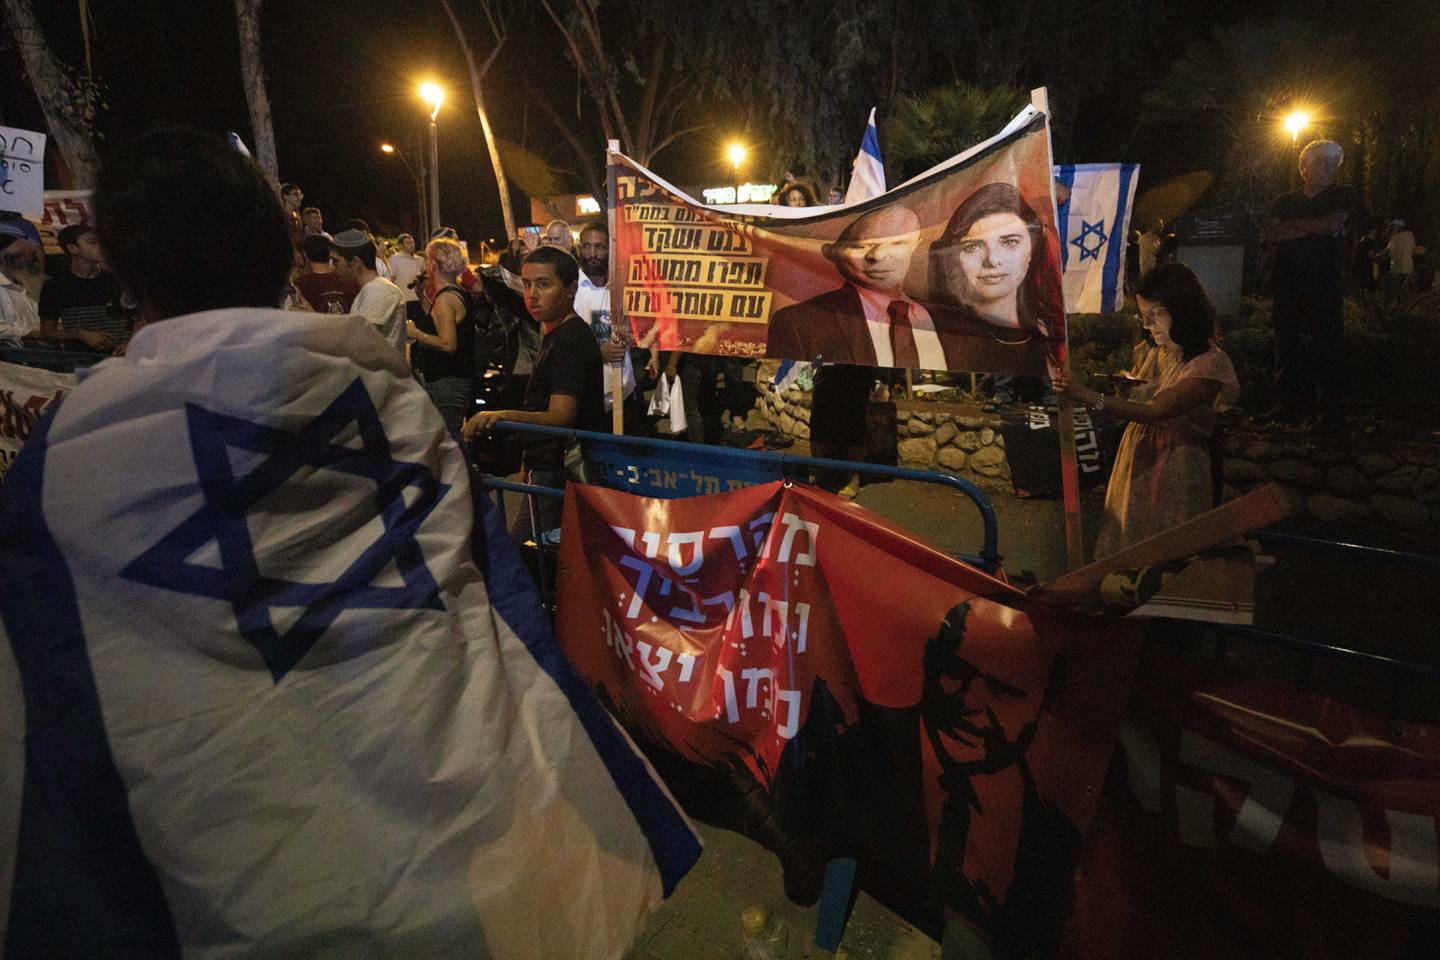 Israeli right-wing activists hold signs showing Naftali Bennett and Ayelet Shaked of the Yamina party, during a demonstration against the possibility of forming a new government in Tel Aviv, Israel, Sunday, May 30, 2021. Bennett, leader of the Yamina party and former ally of Prime Minister Benjamin Netanyahu on Sunday said he would seek to form a coalition government with the Israeli leader's opponents, taking a major step toward ending the rule of the longtime premier. (AP Photo/Sebastian Scheiner)